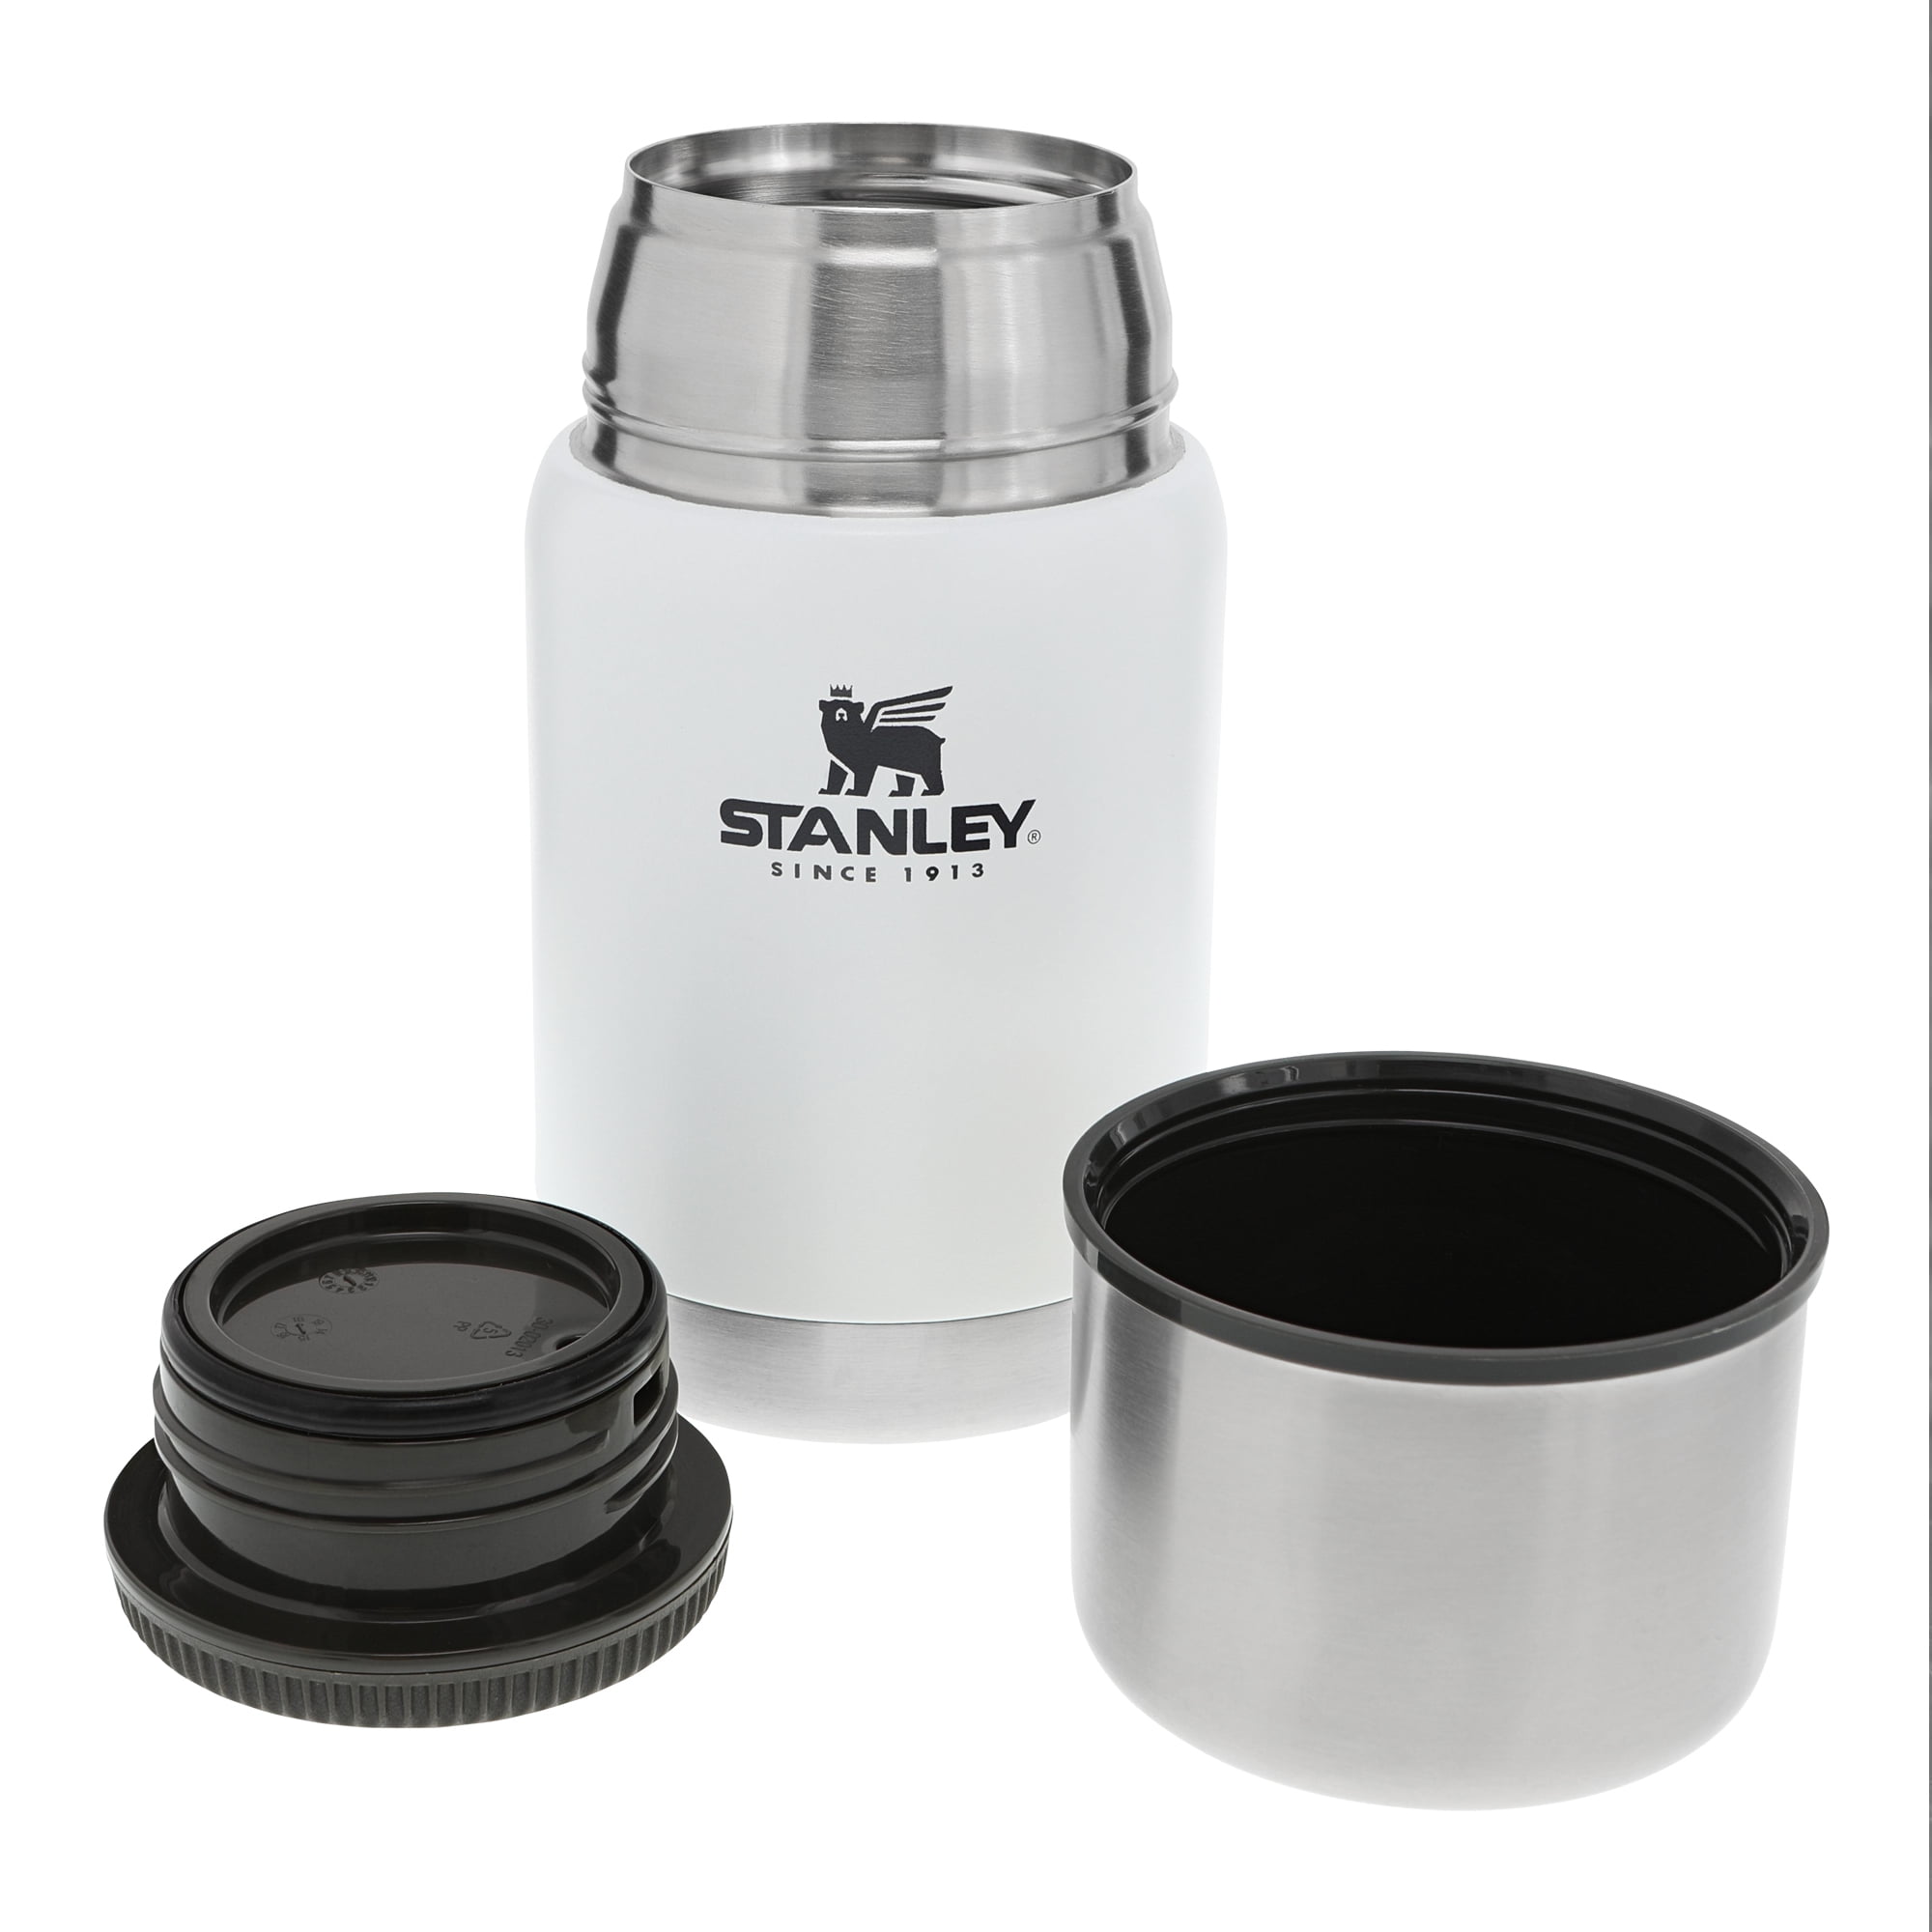 Stanley 24 oz. Black Vacuum Insulated Food Jar 1 pk - Case Of: 1; Each Pack  Qty: 4; Total, Count of: 1 - Kroger